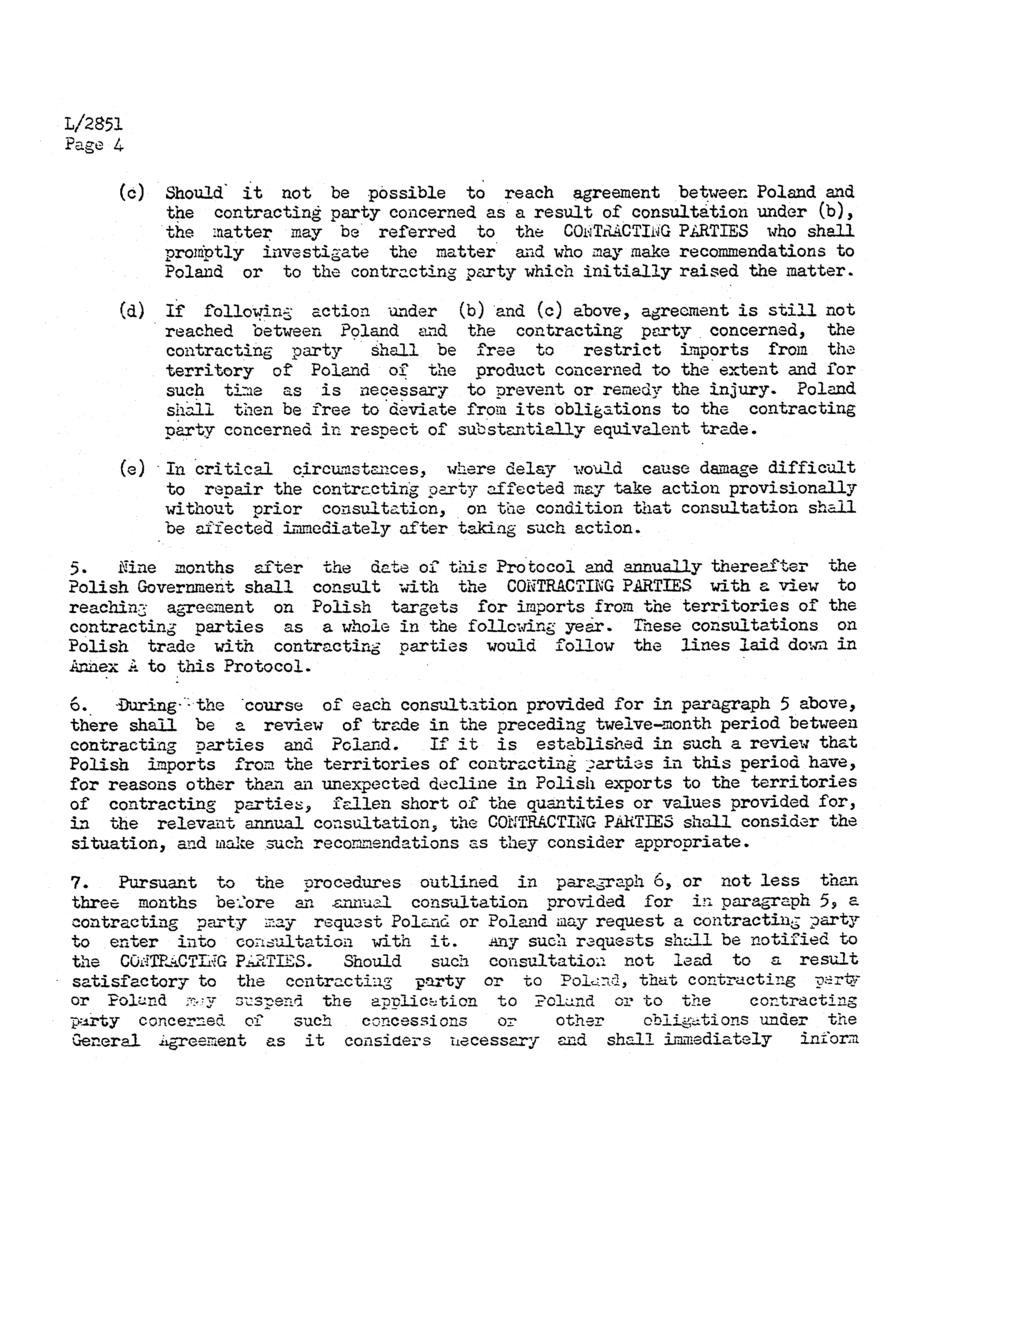 Page 4 (c) Should it not be possible to reach agreement between.